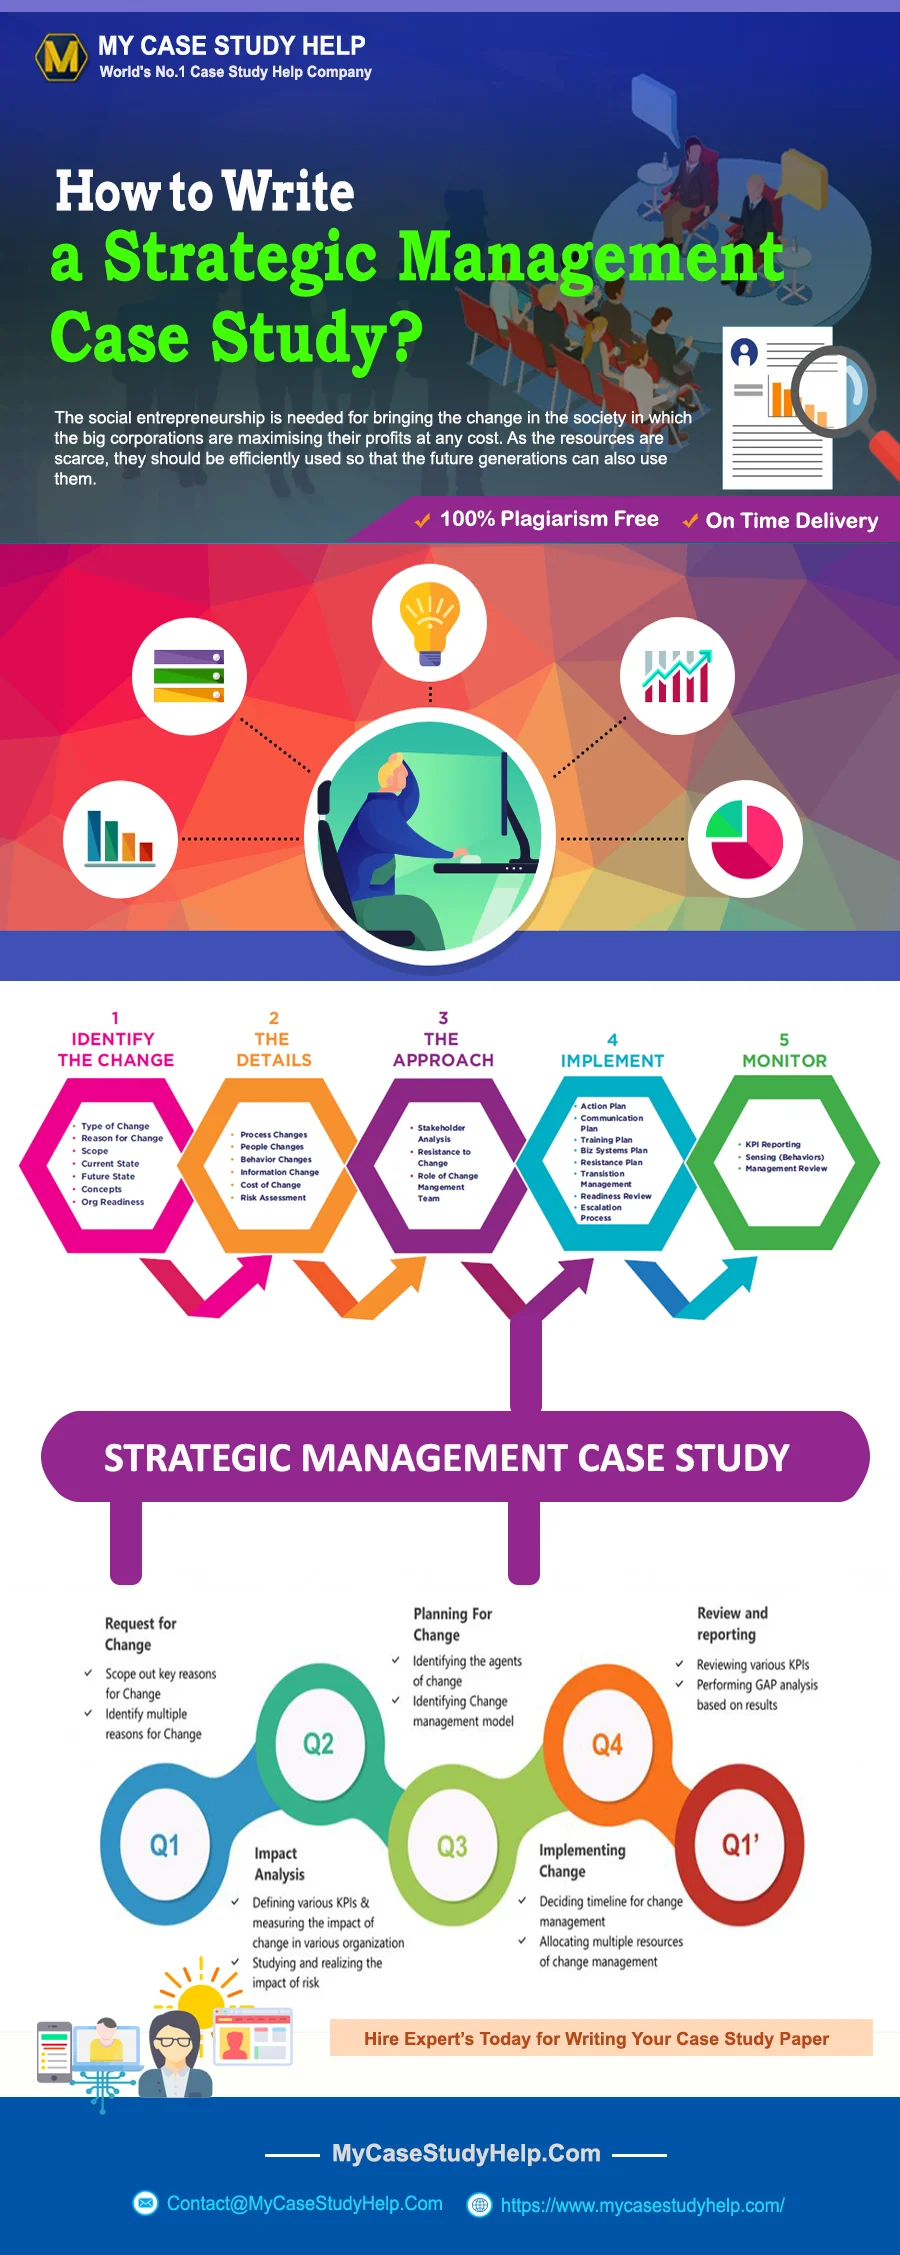 How To Write A Strategic Management Case Study?